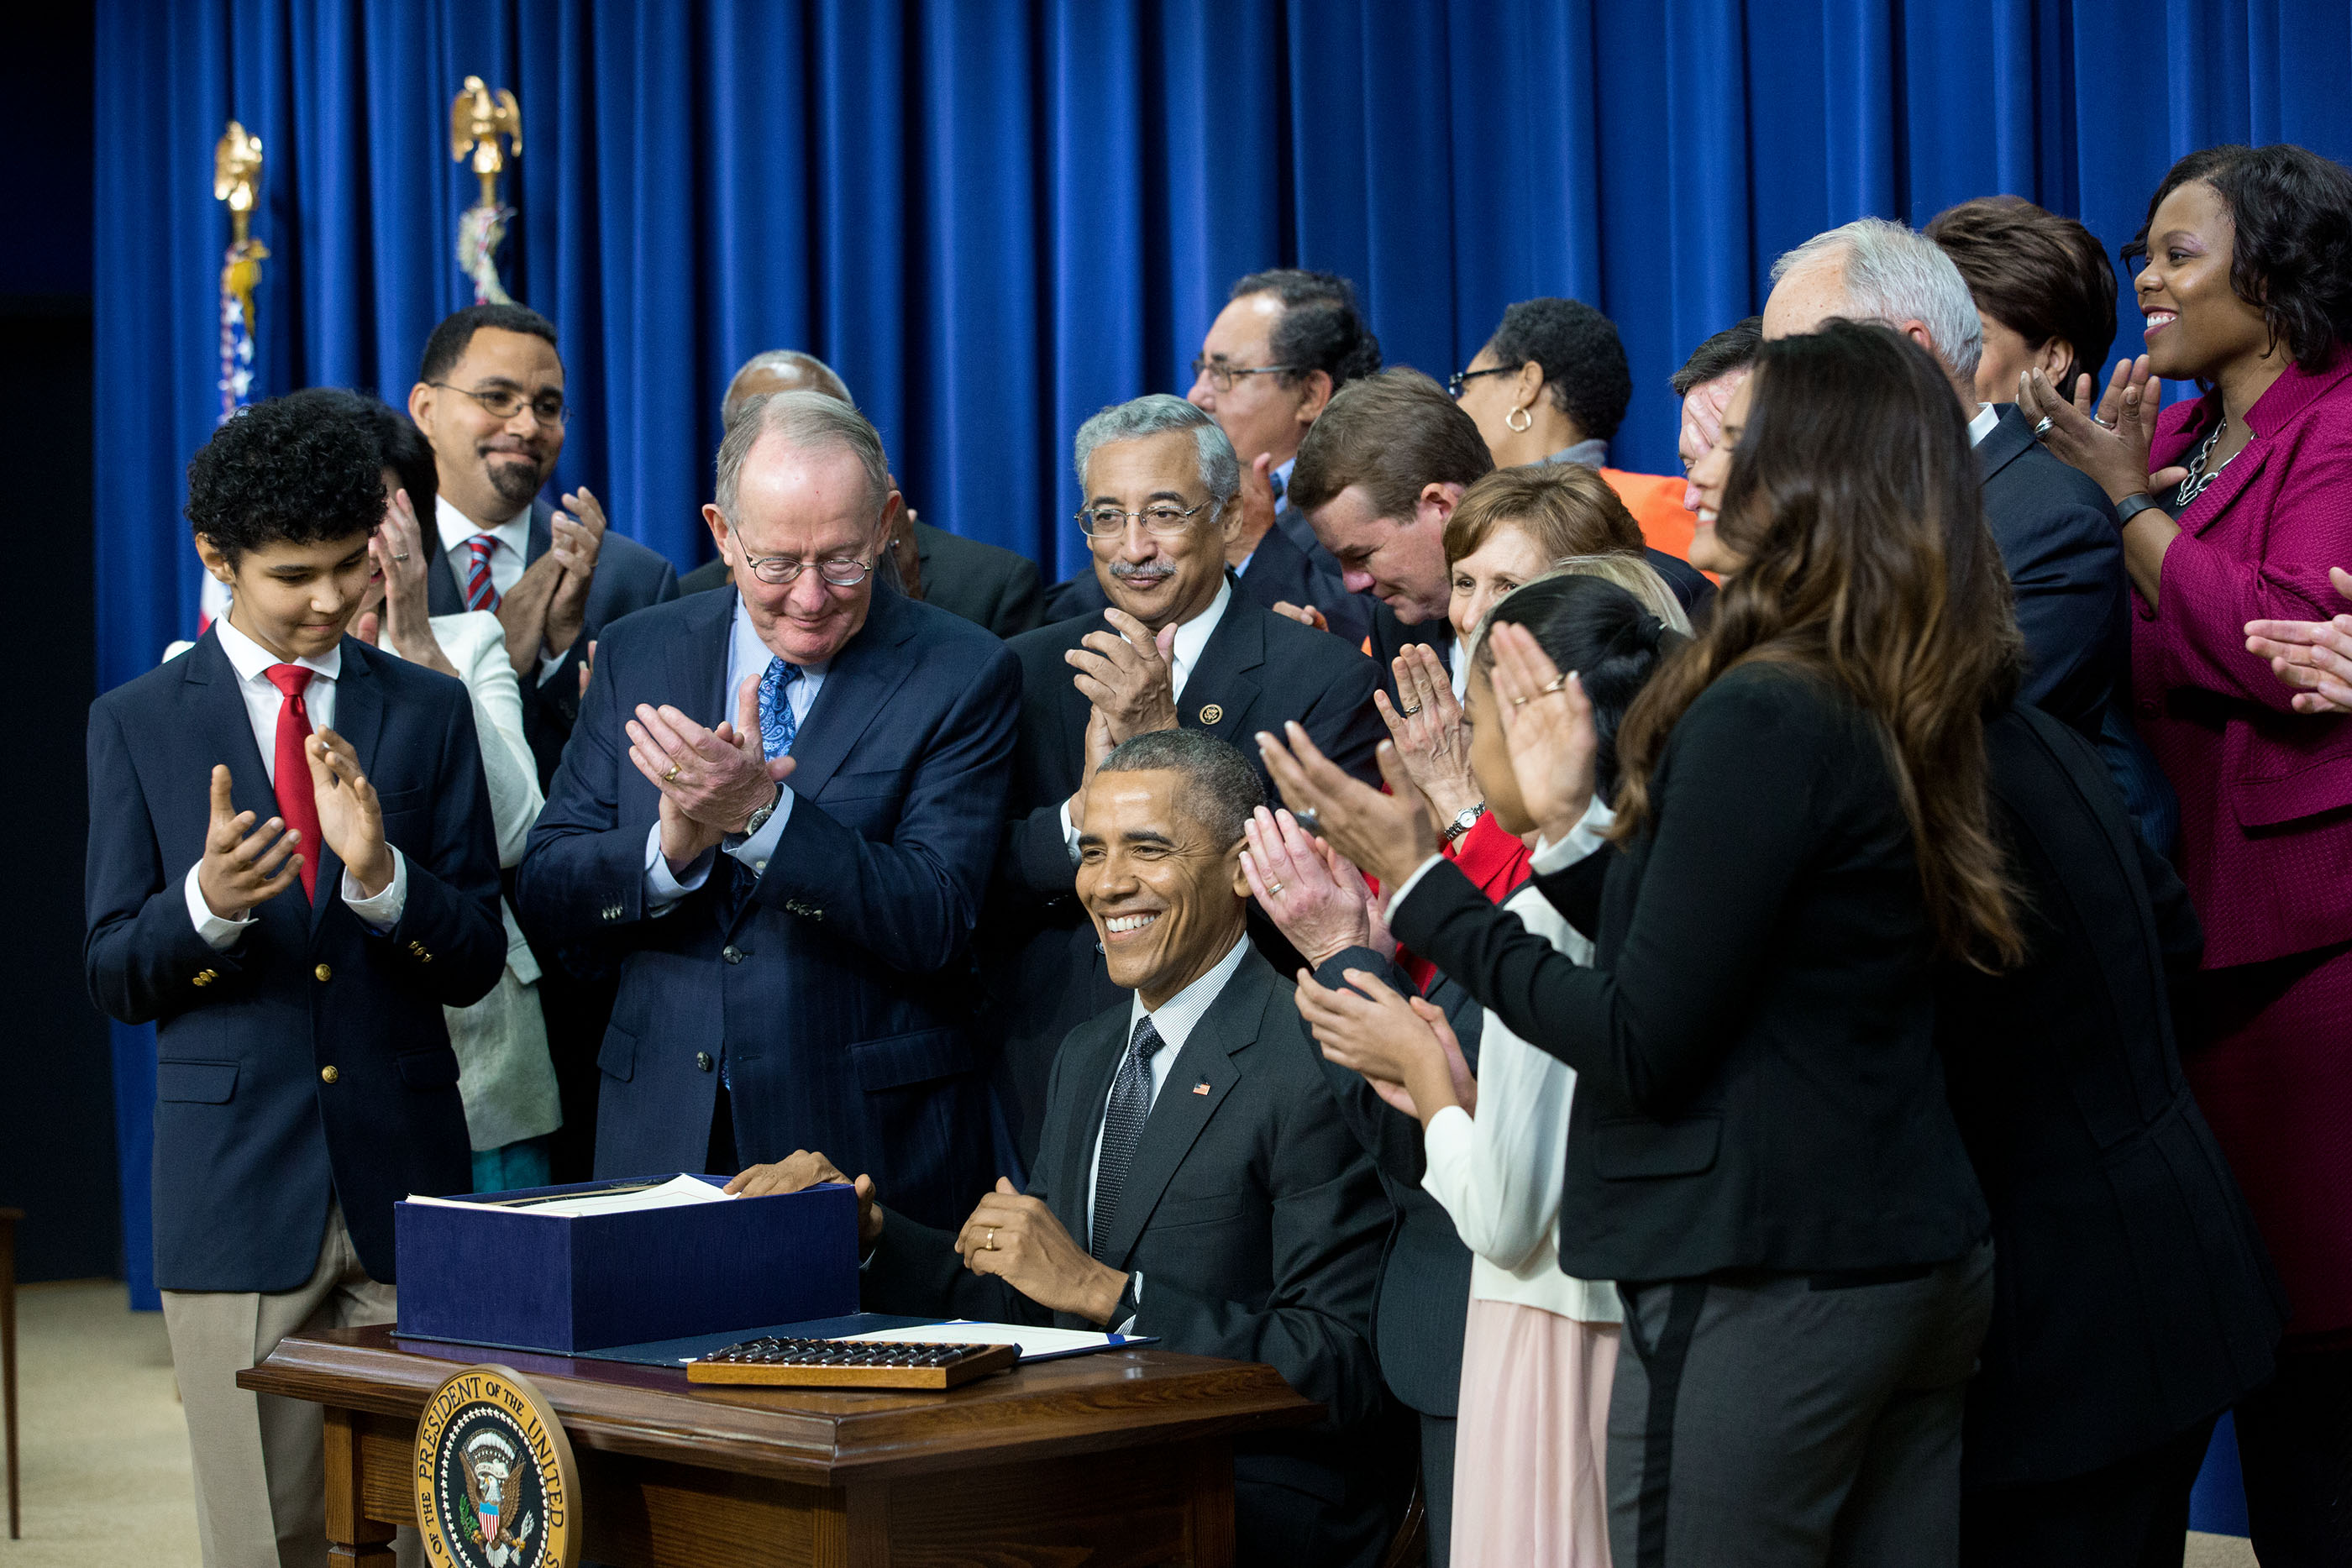 What is a basic requirement of the no child left behind act passed by congress in 2002?